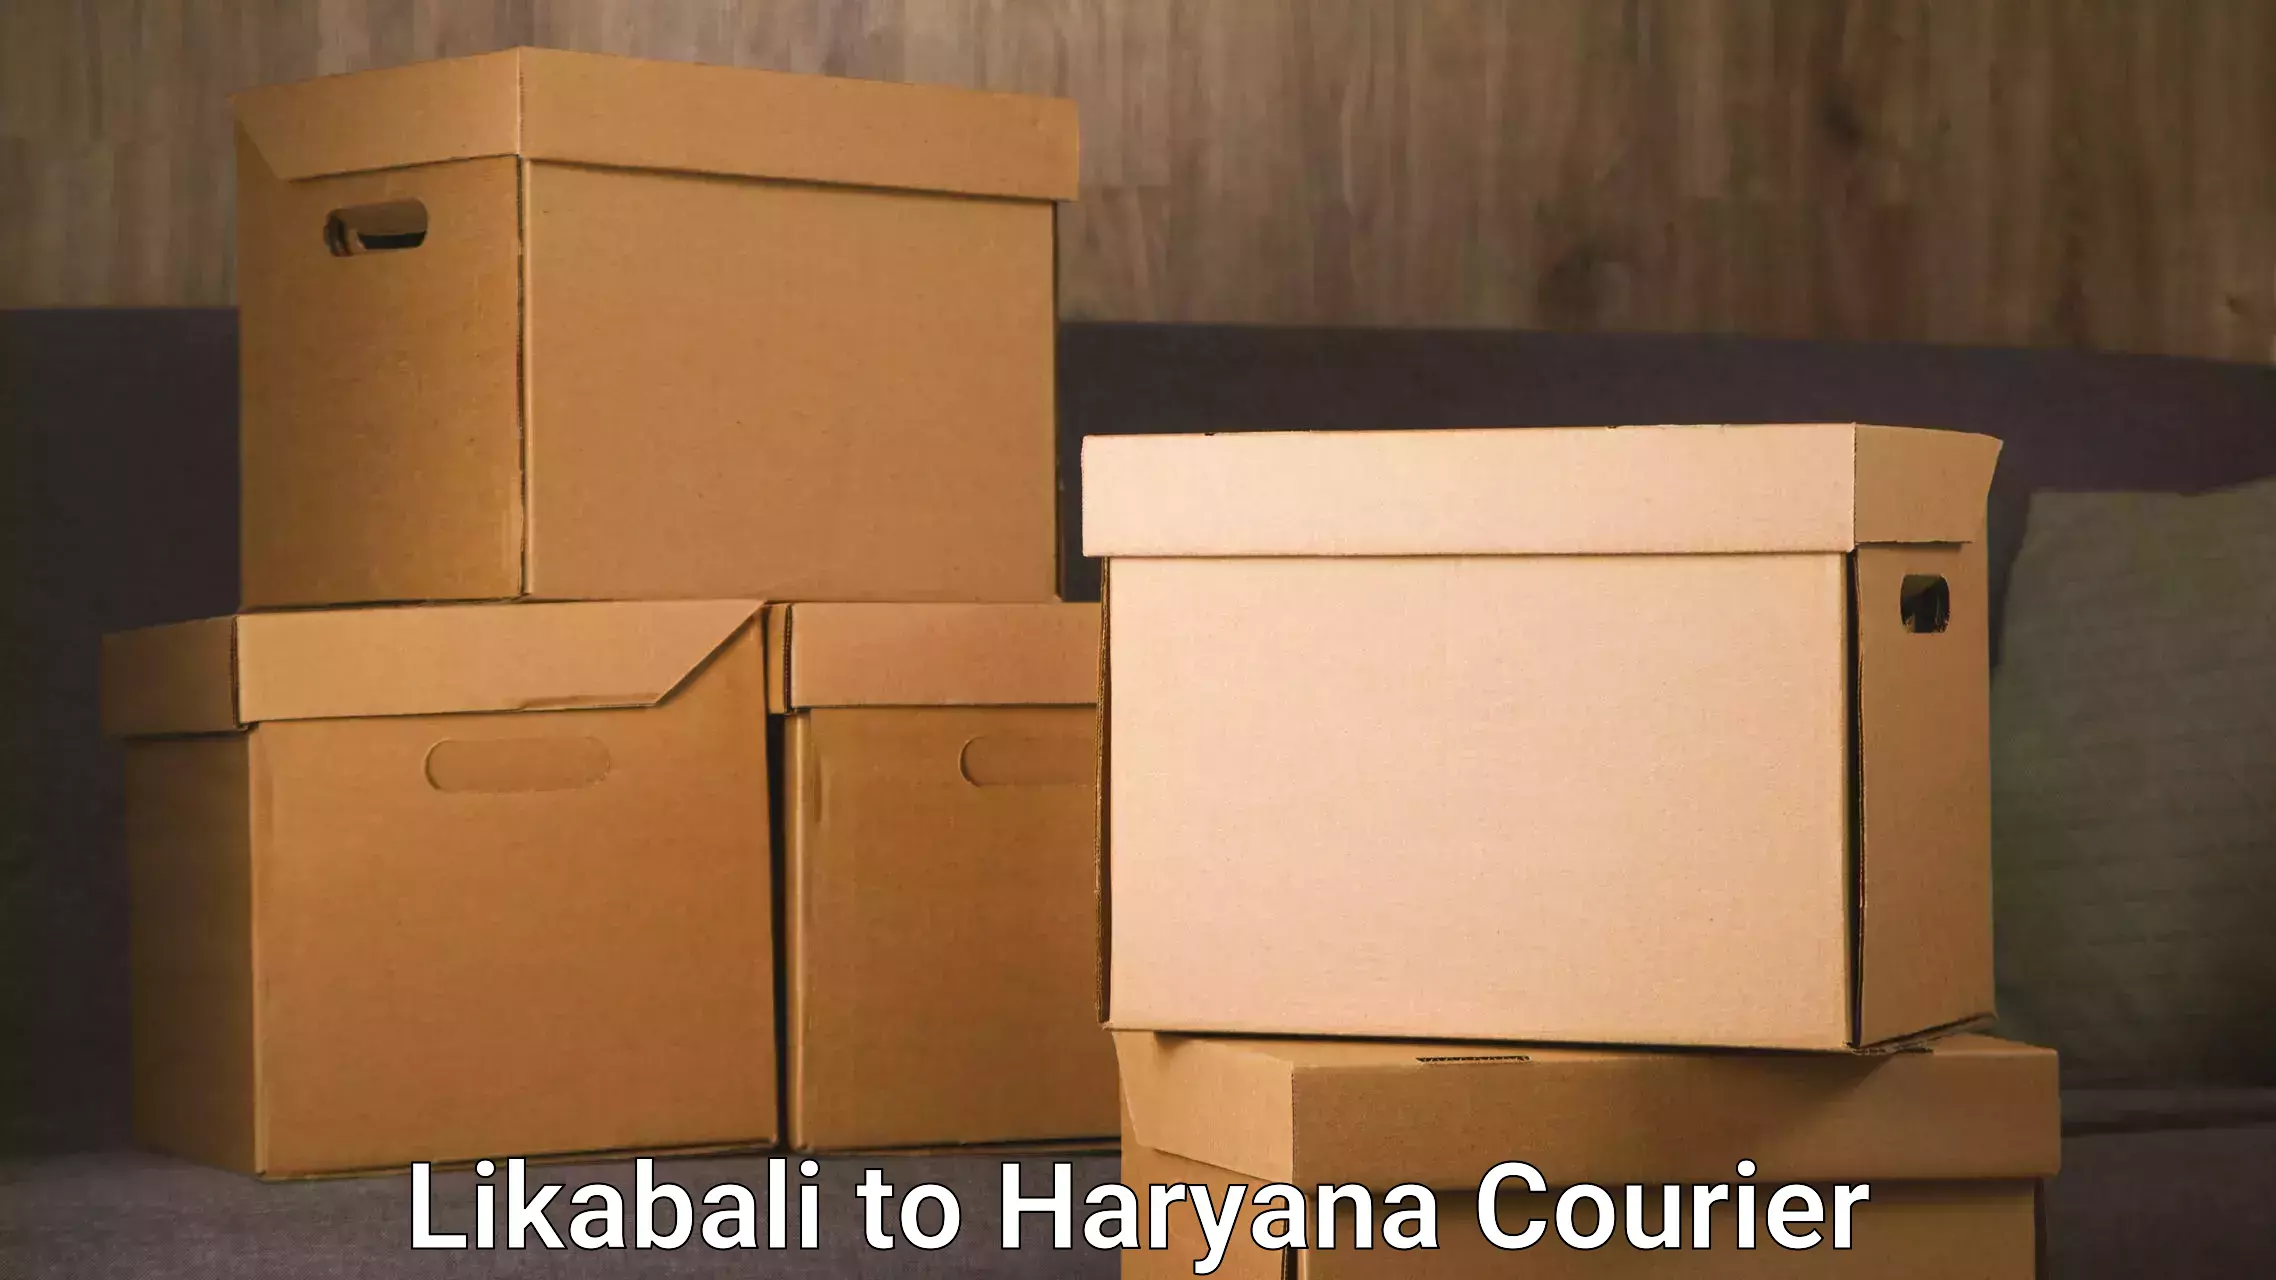 Cash on delivery service Likabali to Haryana